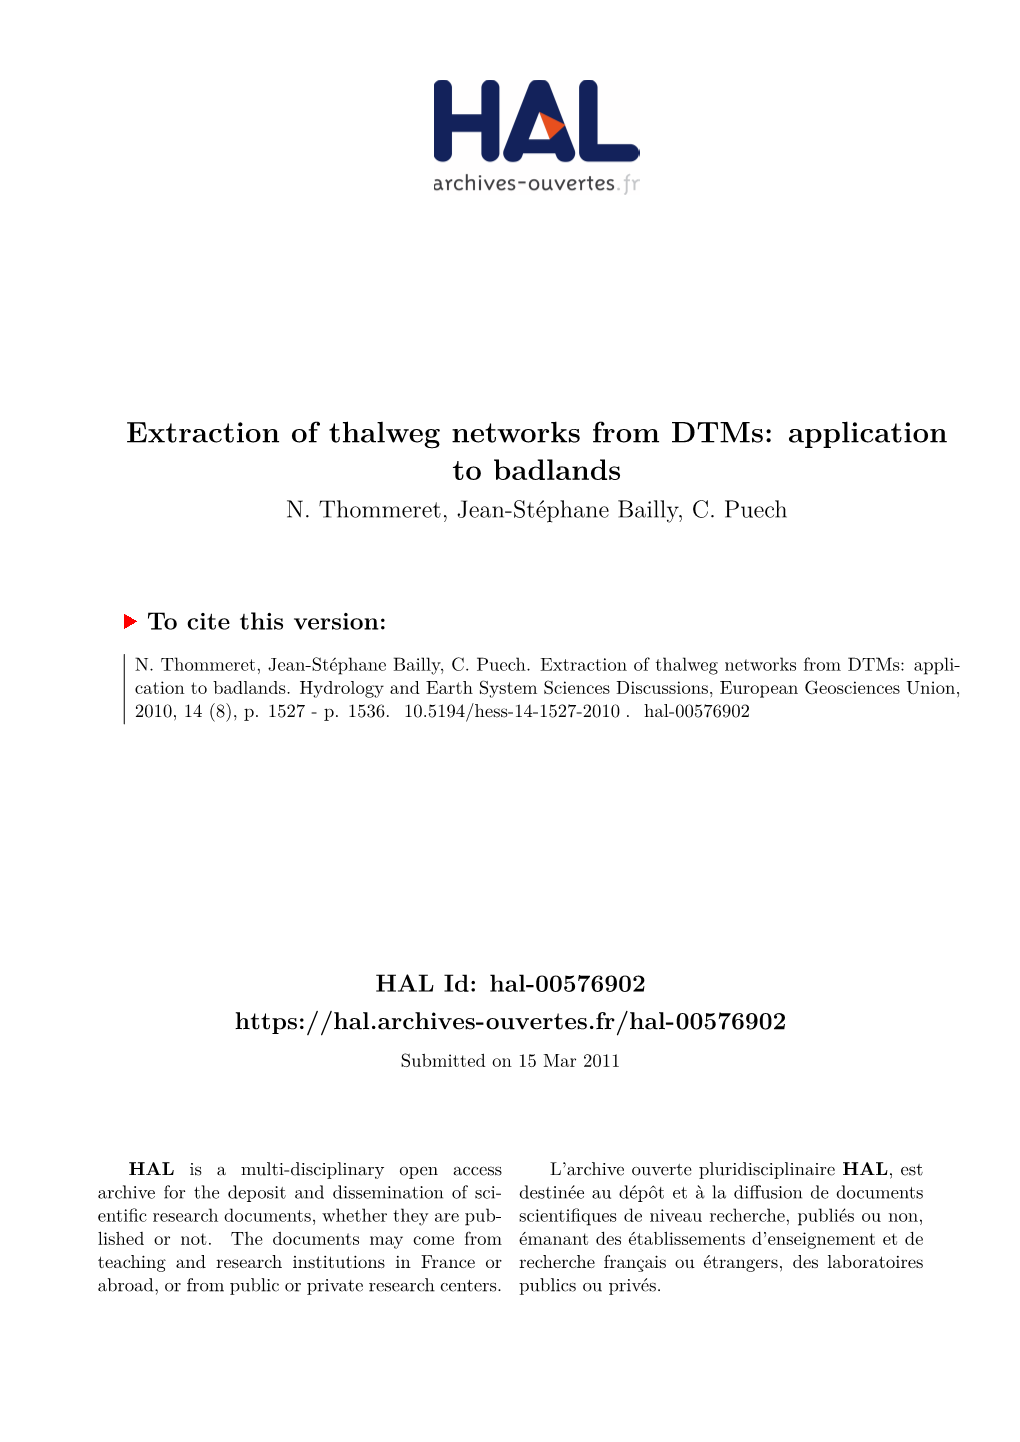 Extraction of Thalweg Networks from Dtms: Application to Badlands N